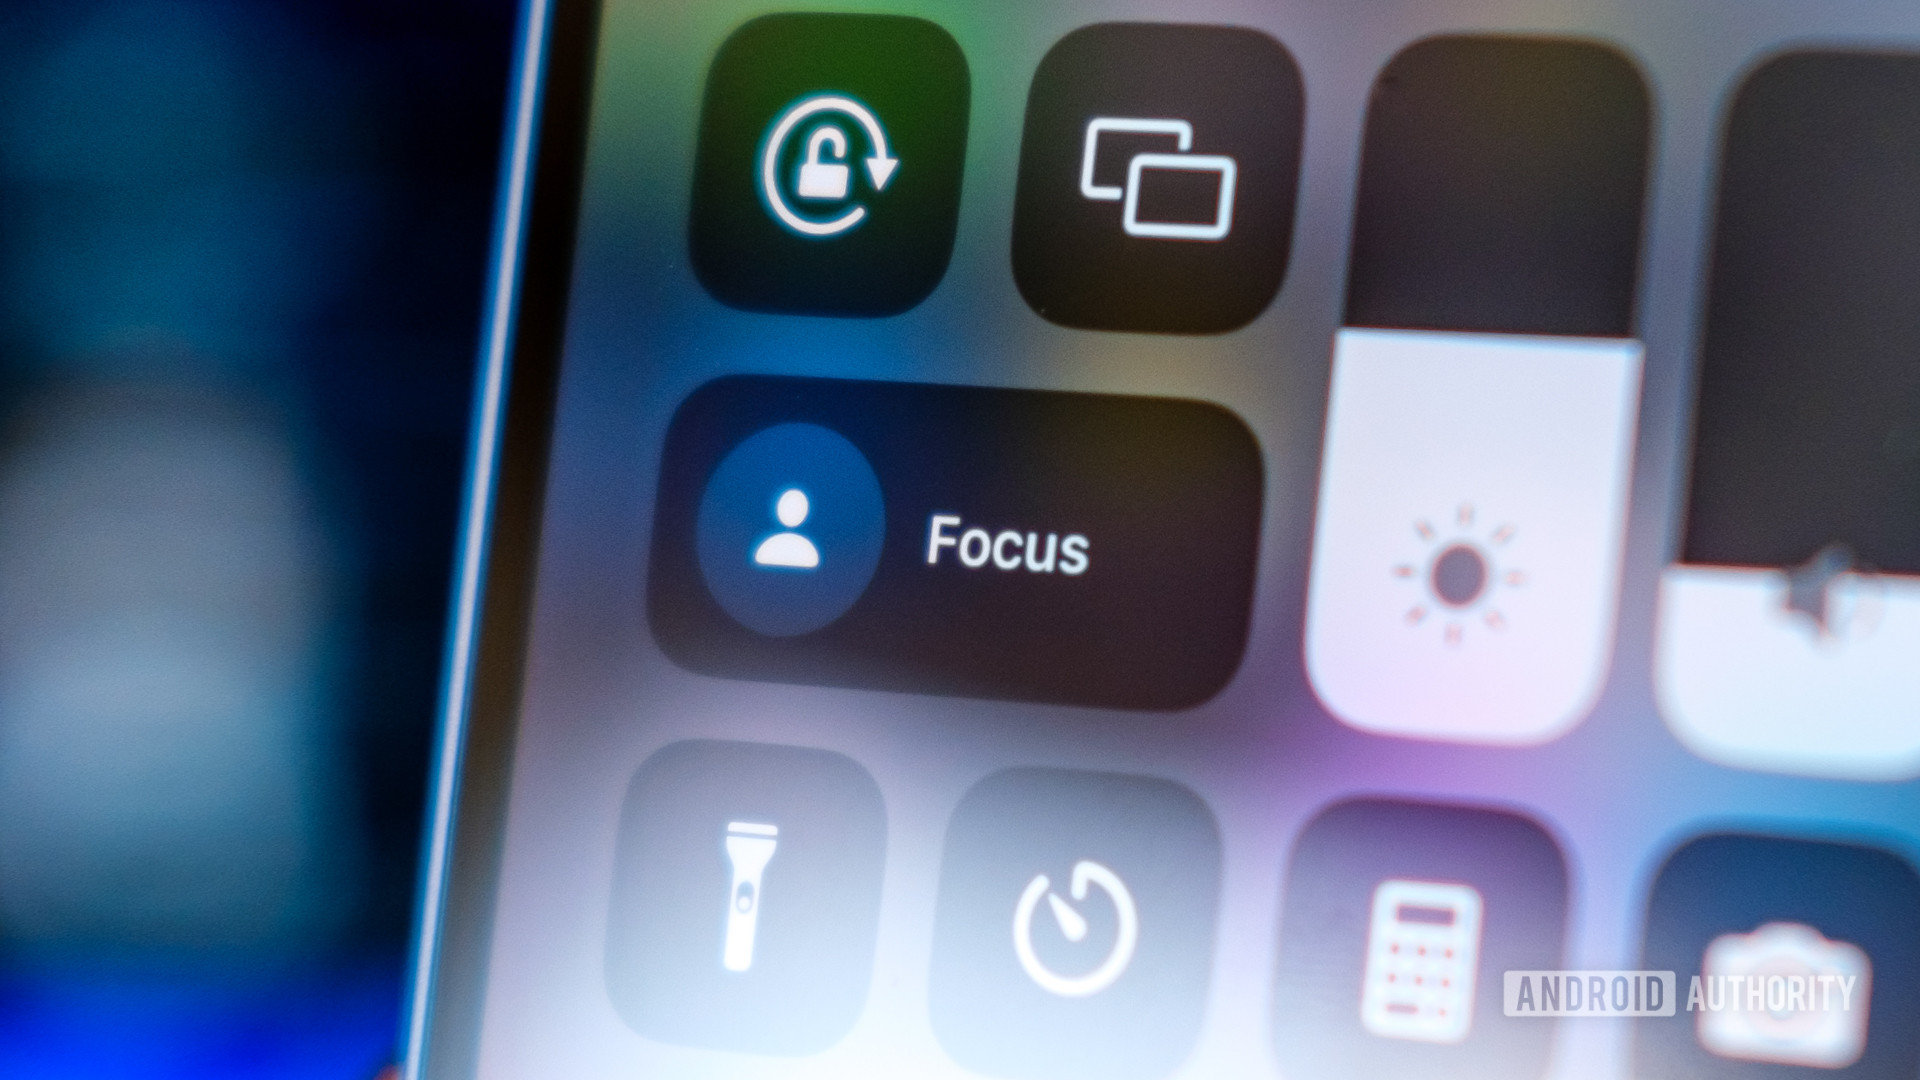 A photo of an Apple iPhone showing the iOS Focus feature.